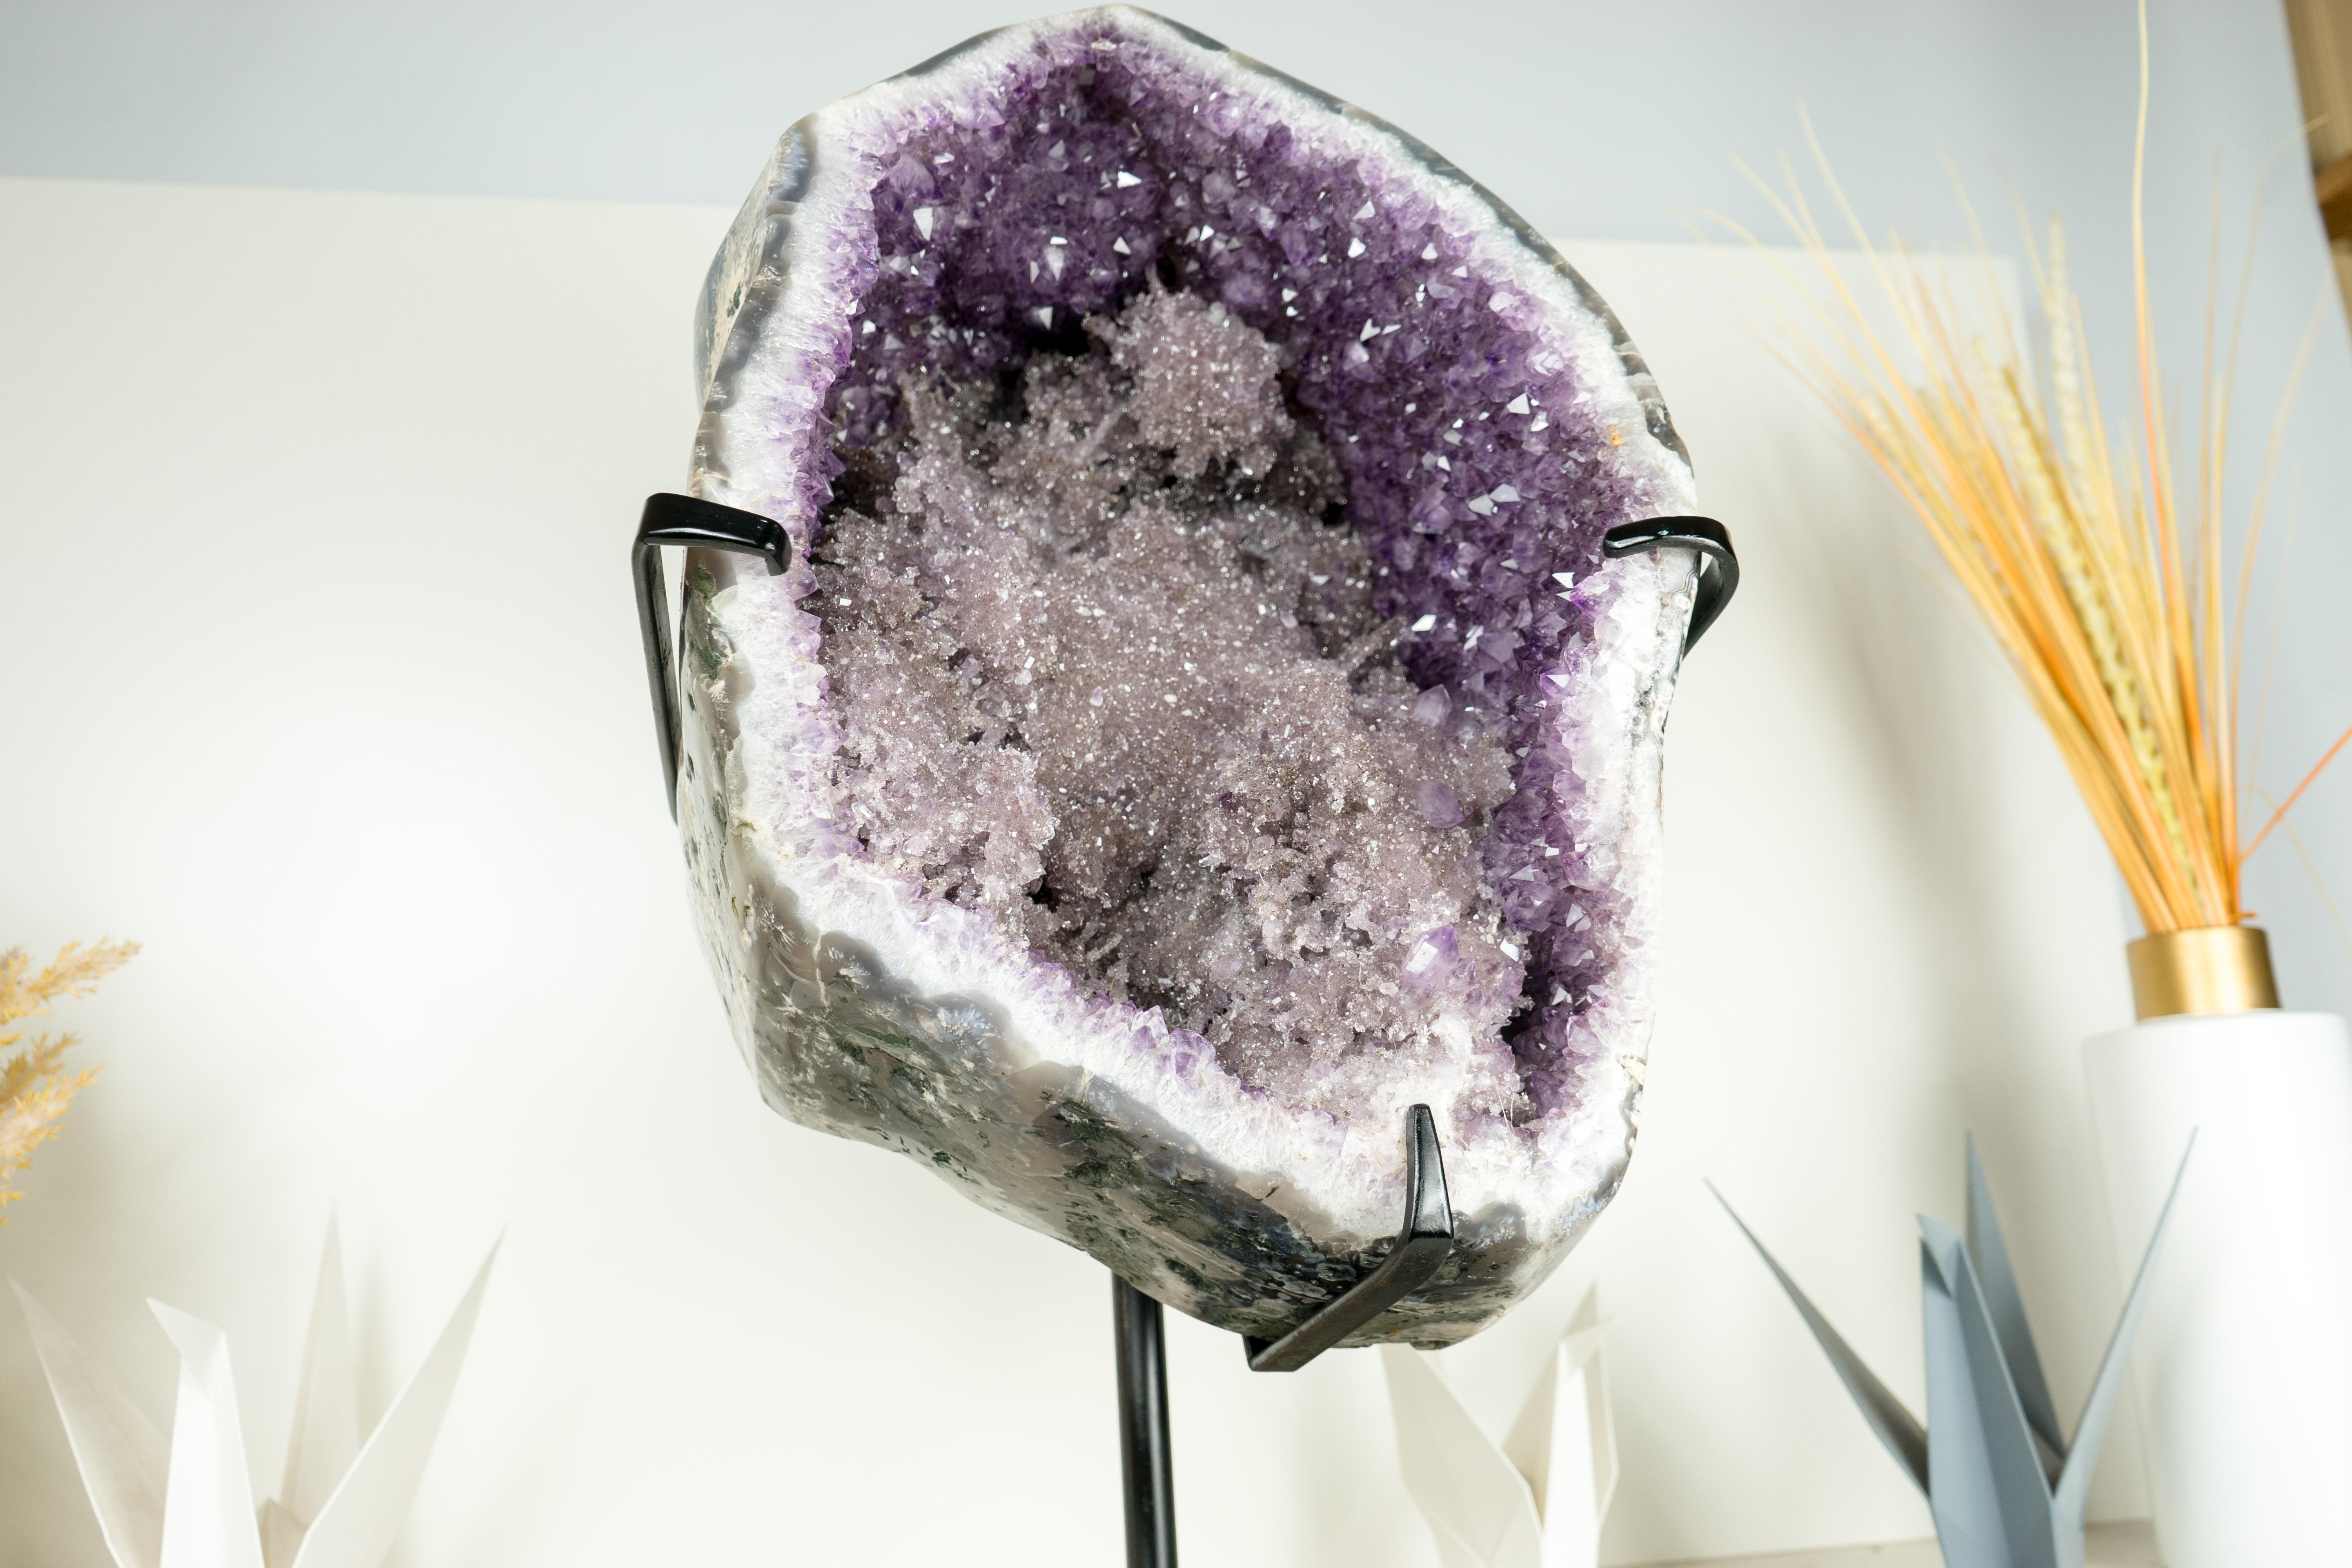 Contemporary Rare Amethyst Geode with Rosette Crystals and Herkimer Diamond-like Clarity  For Sale